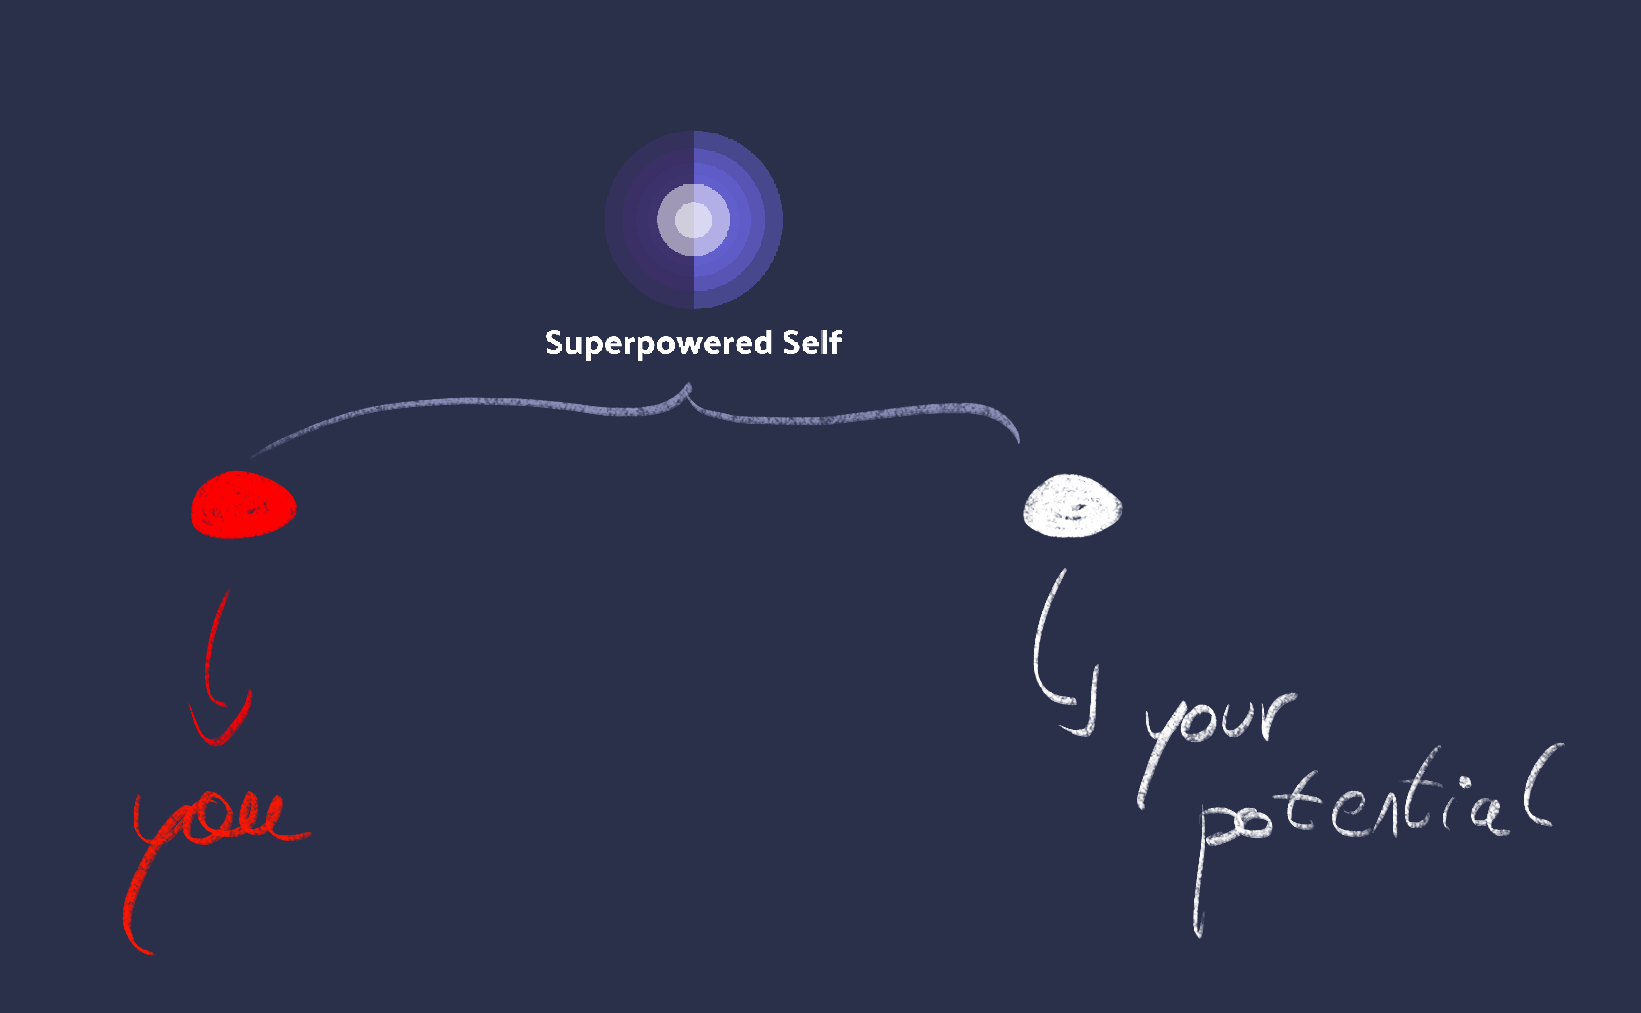 Superpowered Self bridges the gap between you and your potential